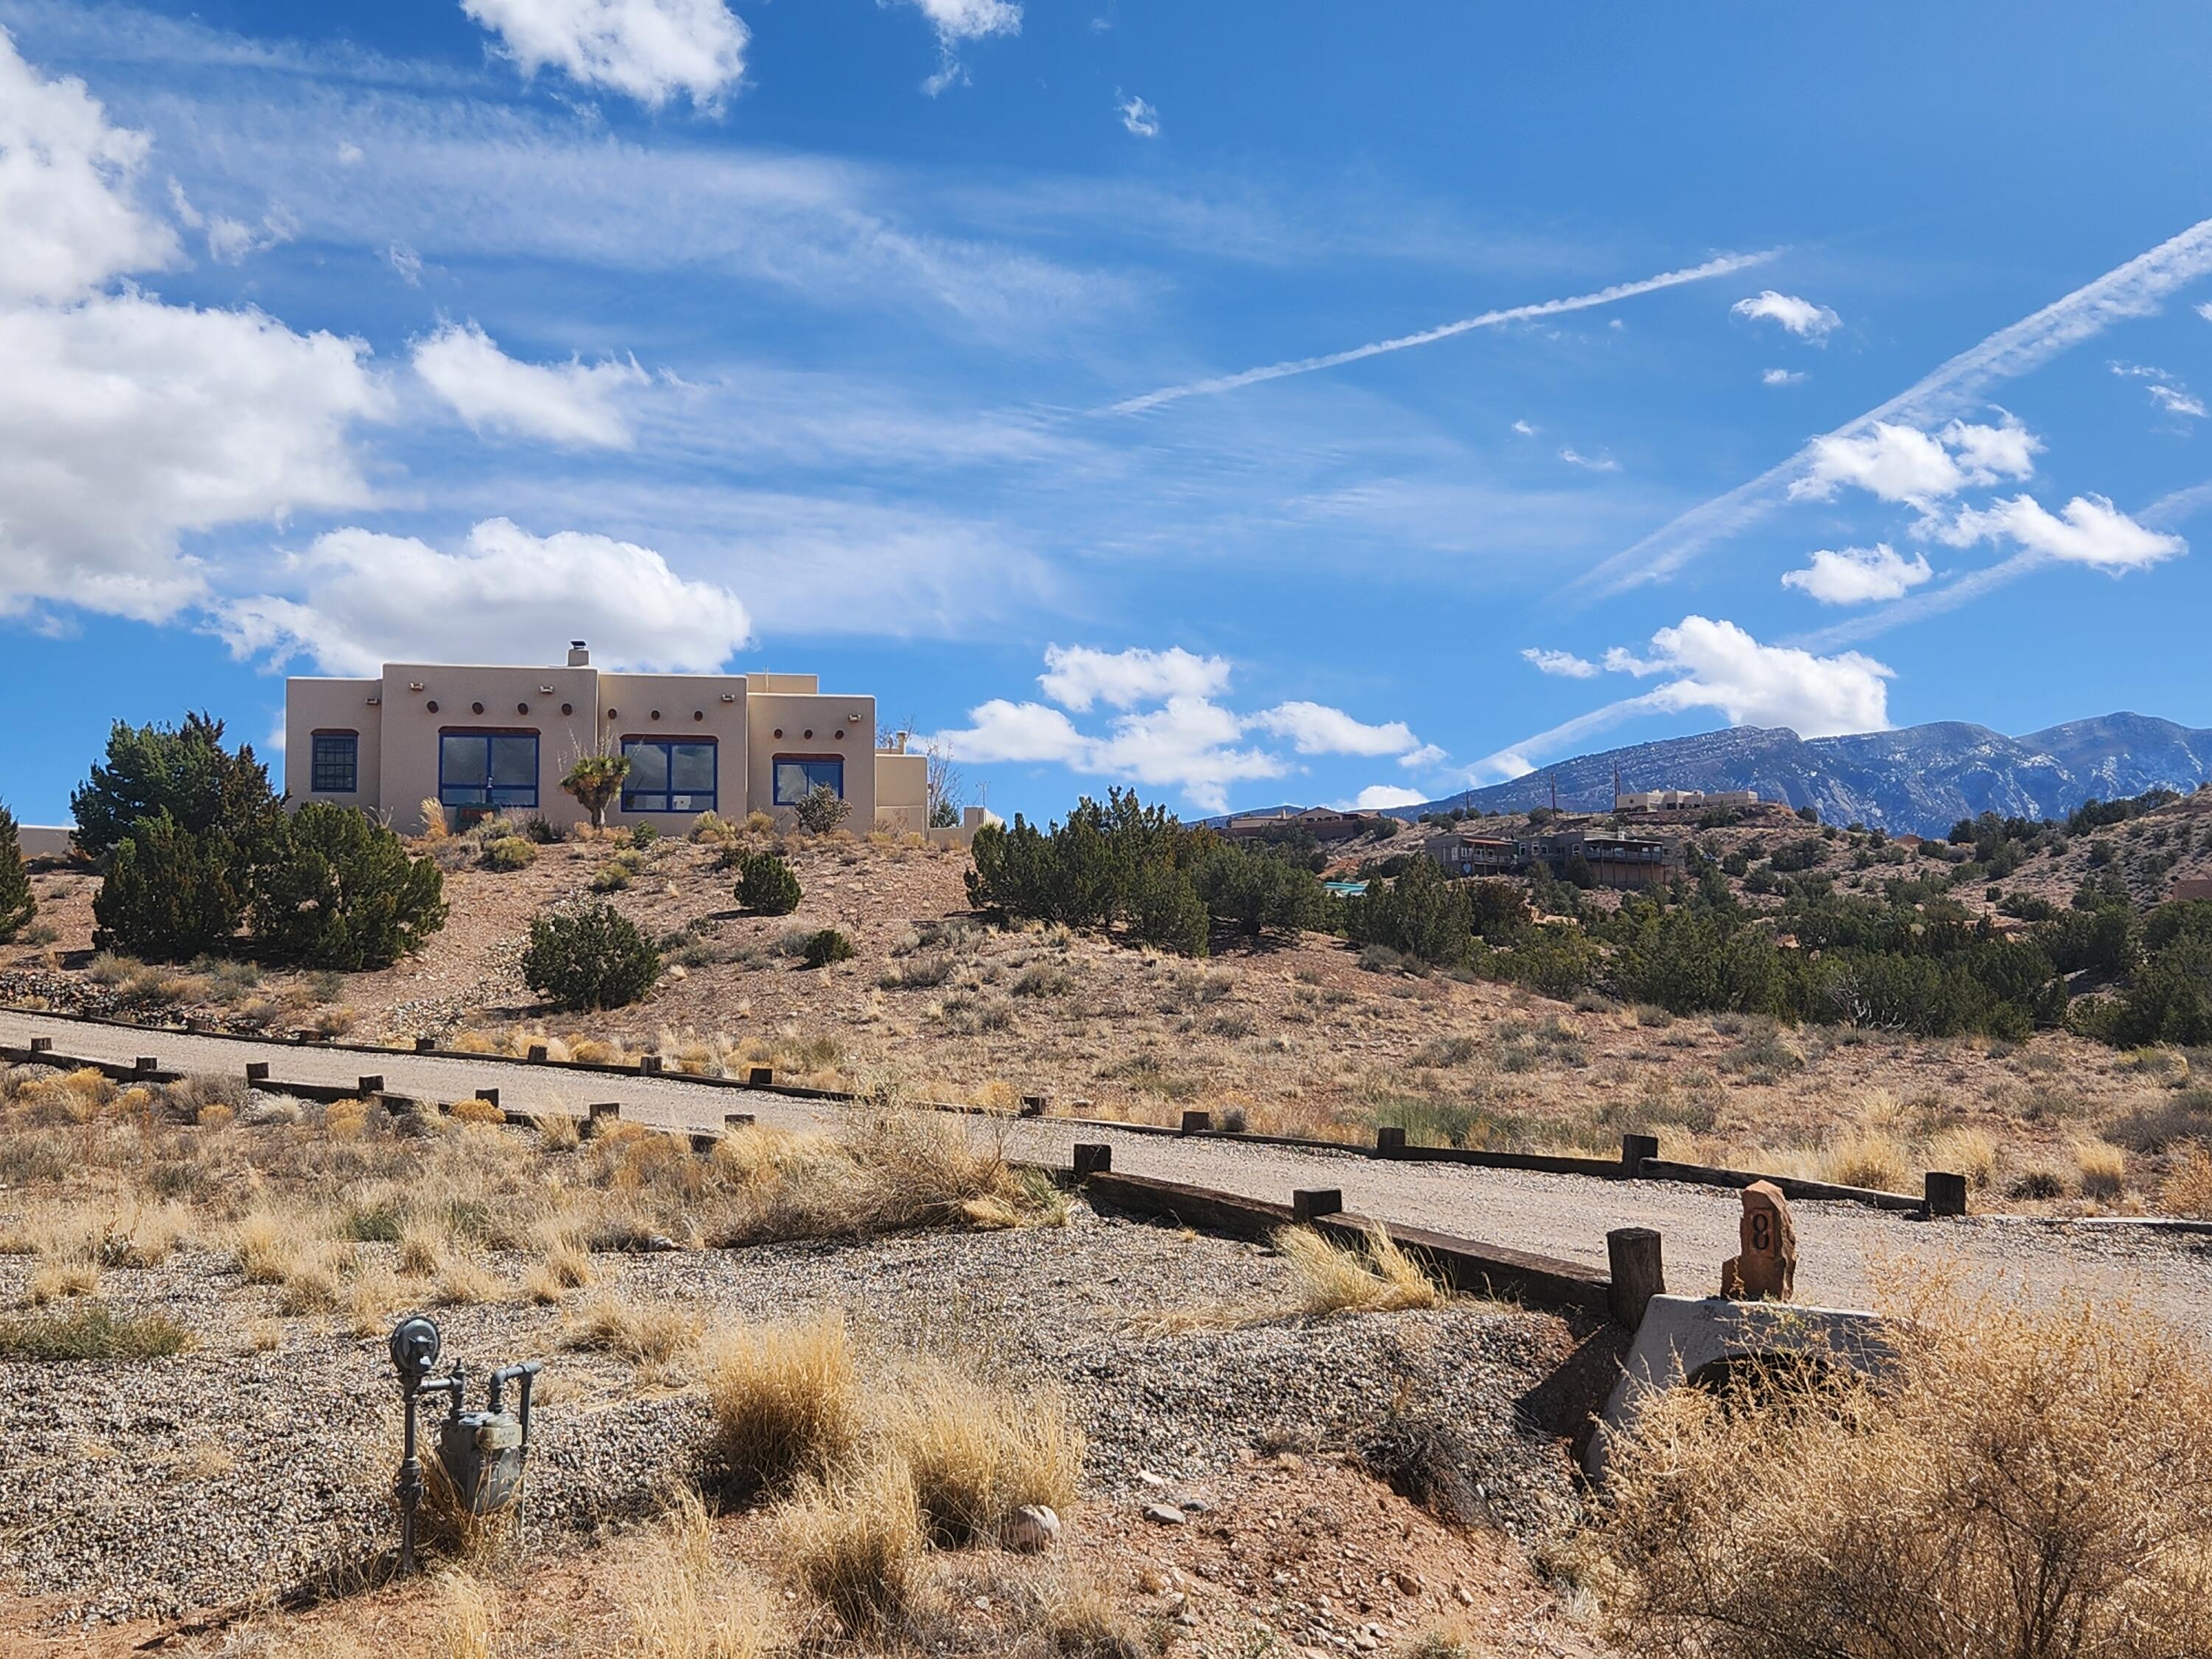 3 BEDROOMS + OFFICE + STUDIO ON 6 ACRES! $810,000. This very private home boasts spectacular views of the mesas from the living, kitchen and dining rooms, as well as views of the Sandias from the primary suite! The 6 acres is surveyed as 2 lots, so you have tons of privacy & you could build another home. Dynamic floor plan with separate studio (or media room...) accessed through the private enclosed courtyard! Remodeled kitchen has new cabinets, stainless steel appliances & granite counters. Oversize (1315 sf) garage can fit 2 cars + your RV and still has space for workshop & storage. Recent TPO roof, water heater & cooling. Pueblo style with beams (vigas) ceilings, kiva fireplace, nichos, Mexican tile floors & arched hallway. On community water. The closest neighbors are over 200' away!